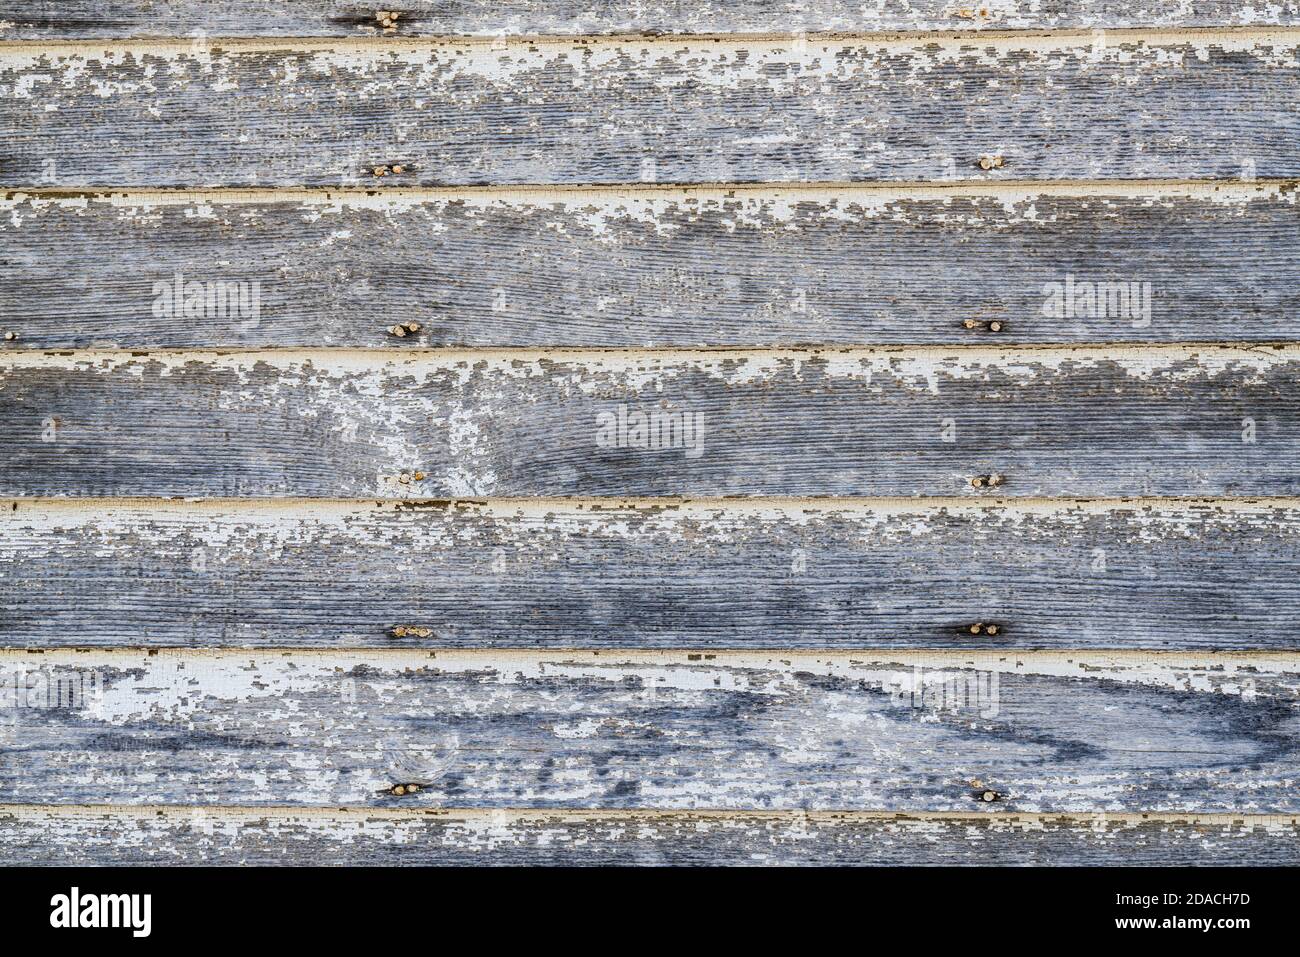 Weathered white and gray wood plank background with peeling paint Stock Photo